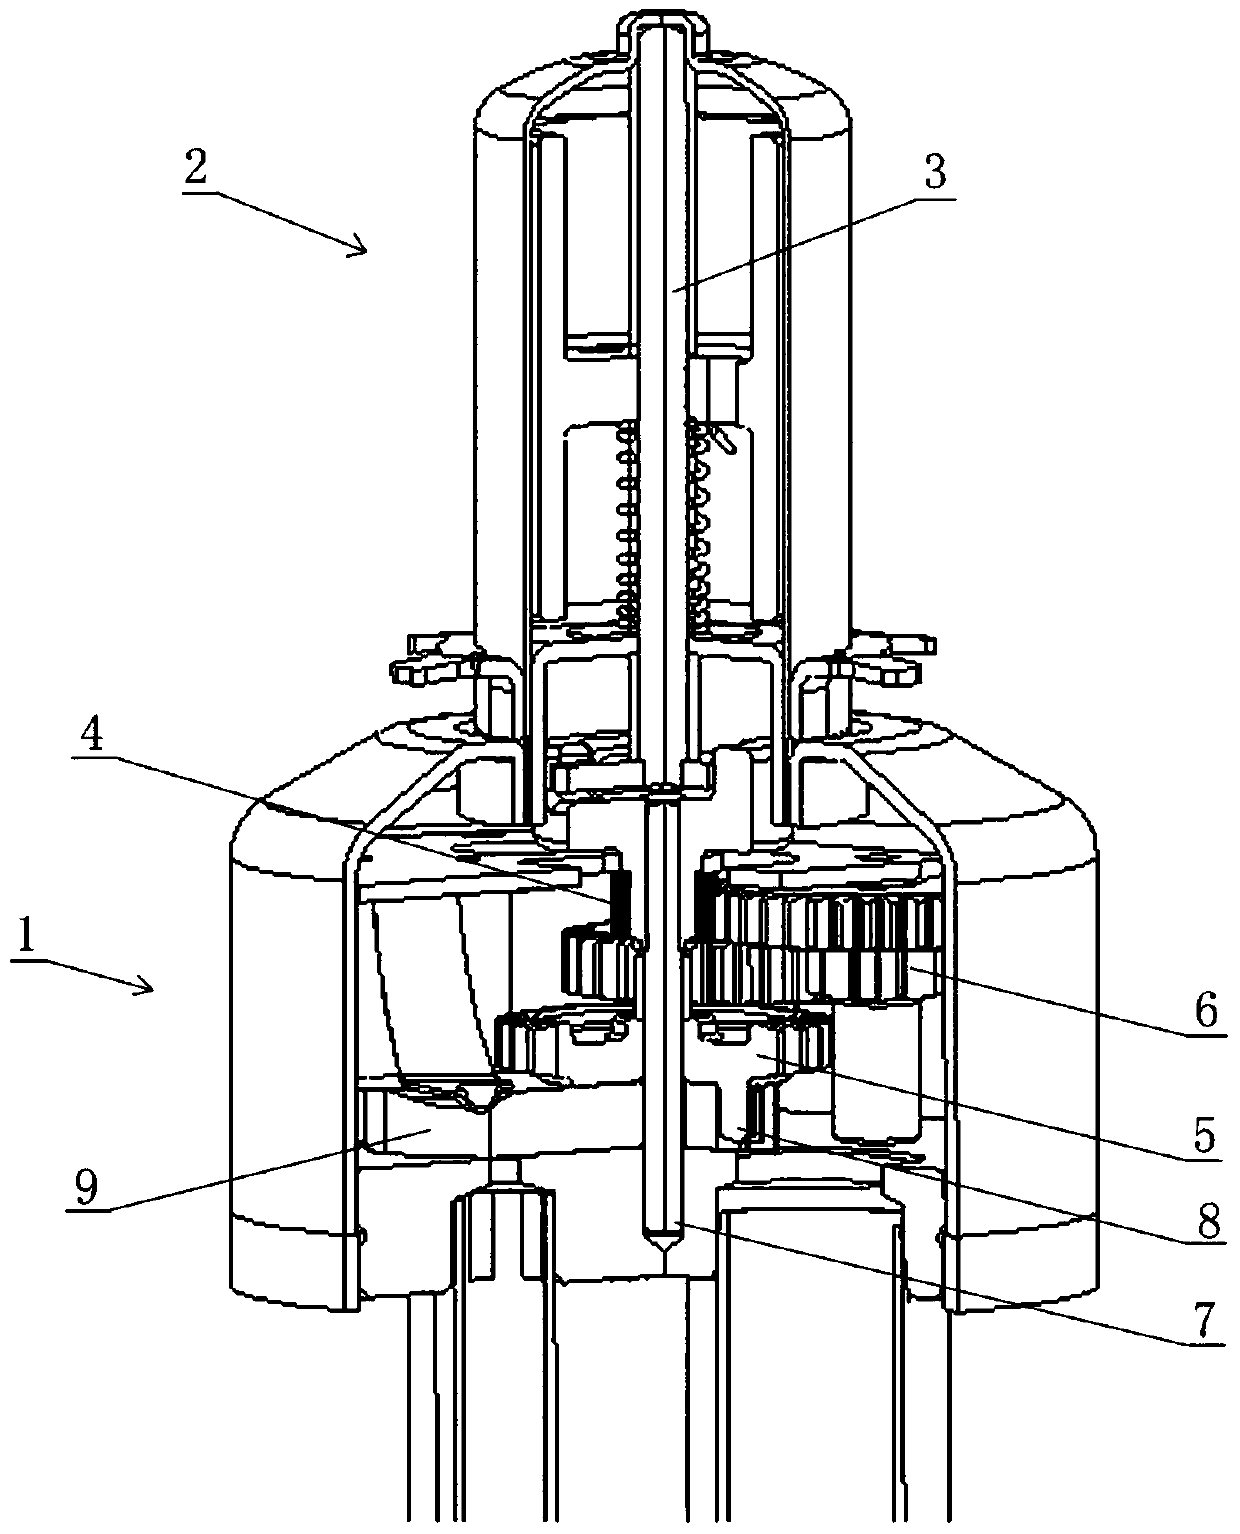 An electric three-way valve and refrigeration equipment